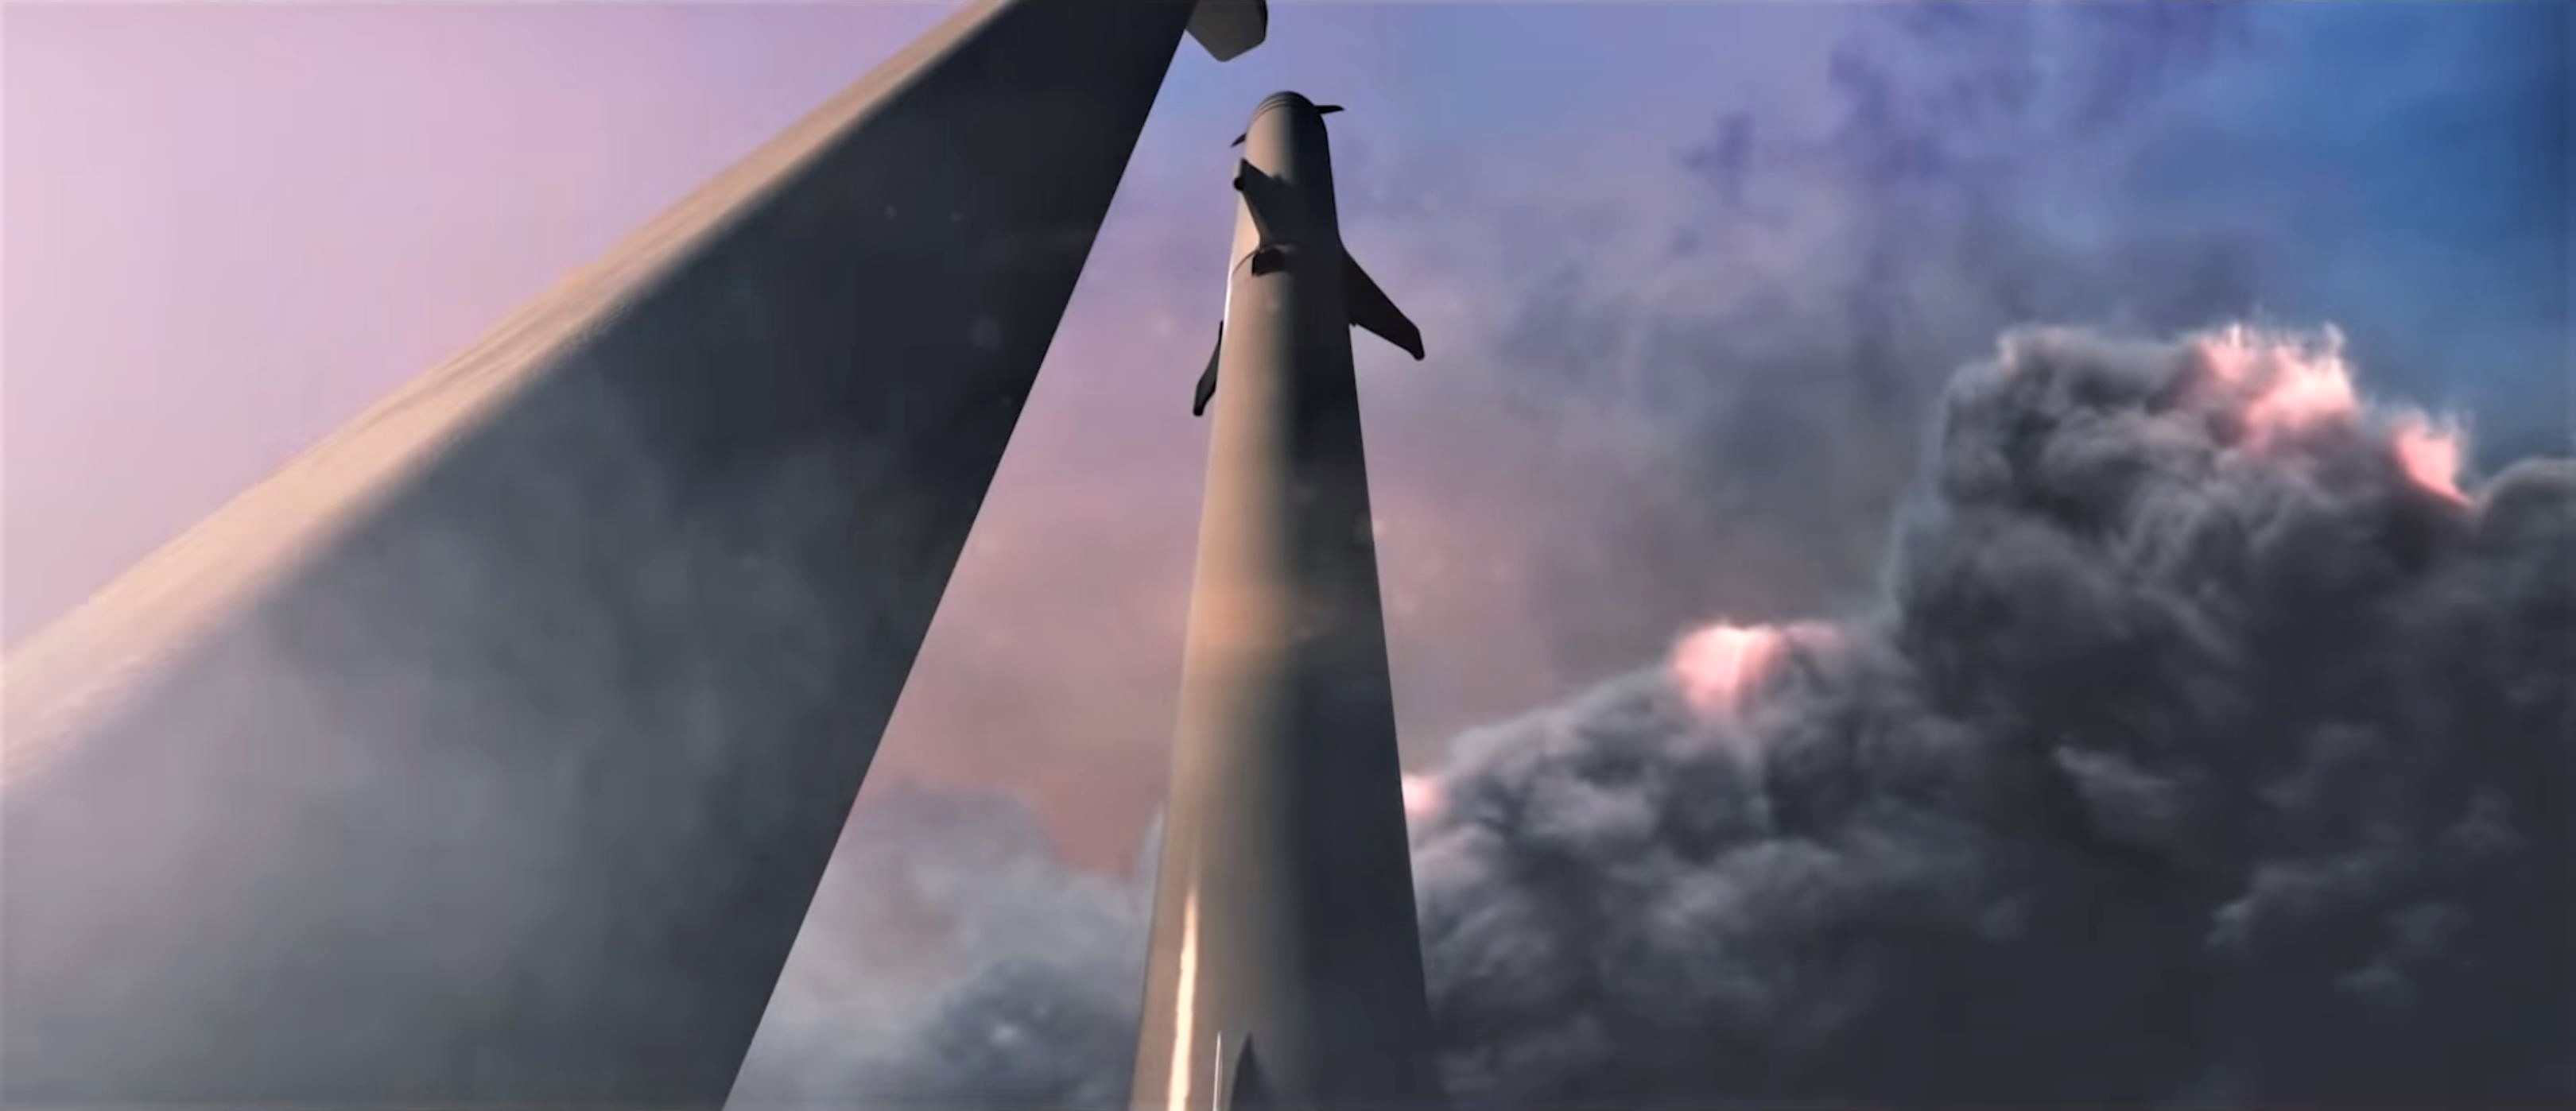 BFR 2018 launch render (SpaceX) 2